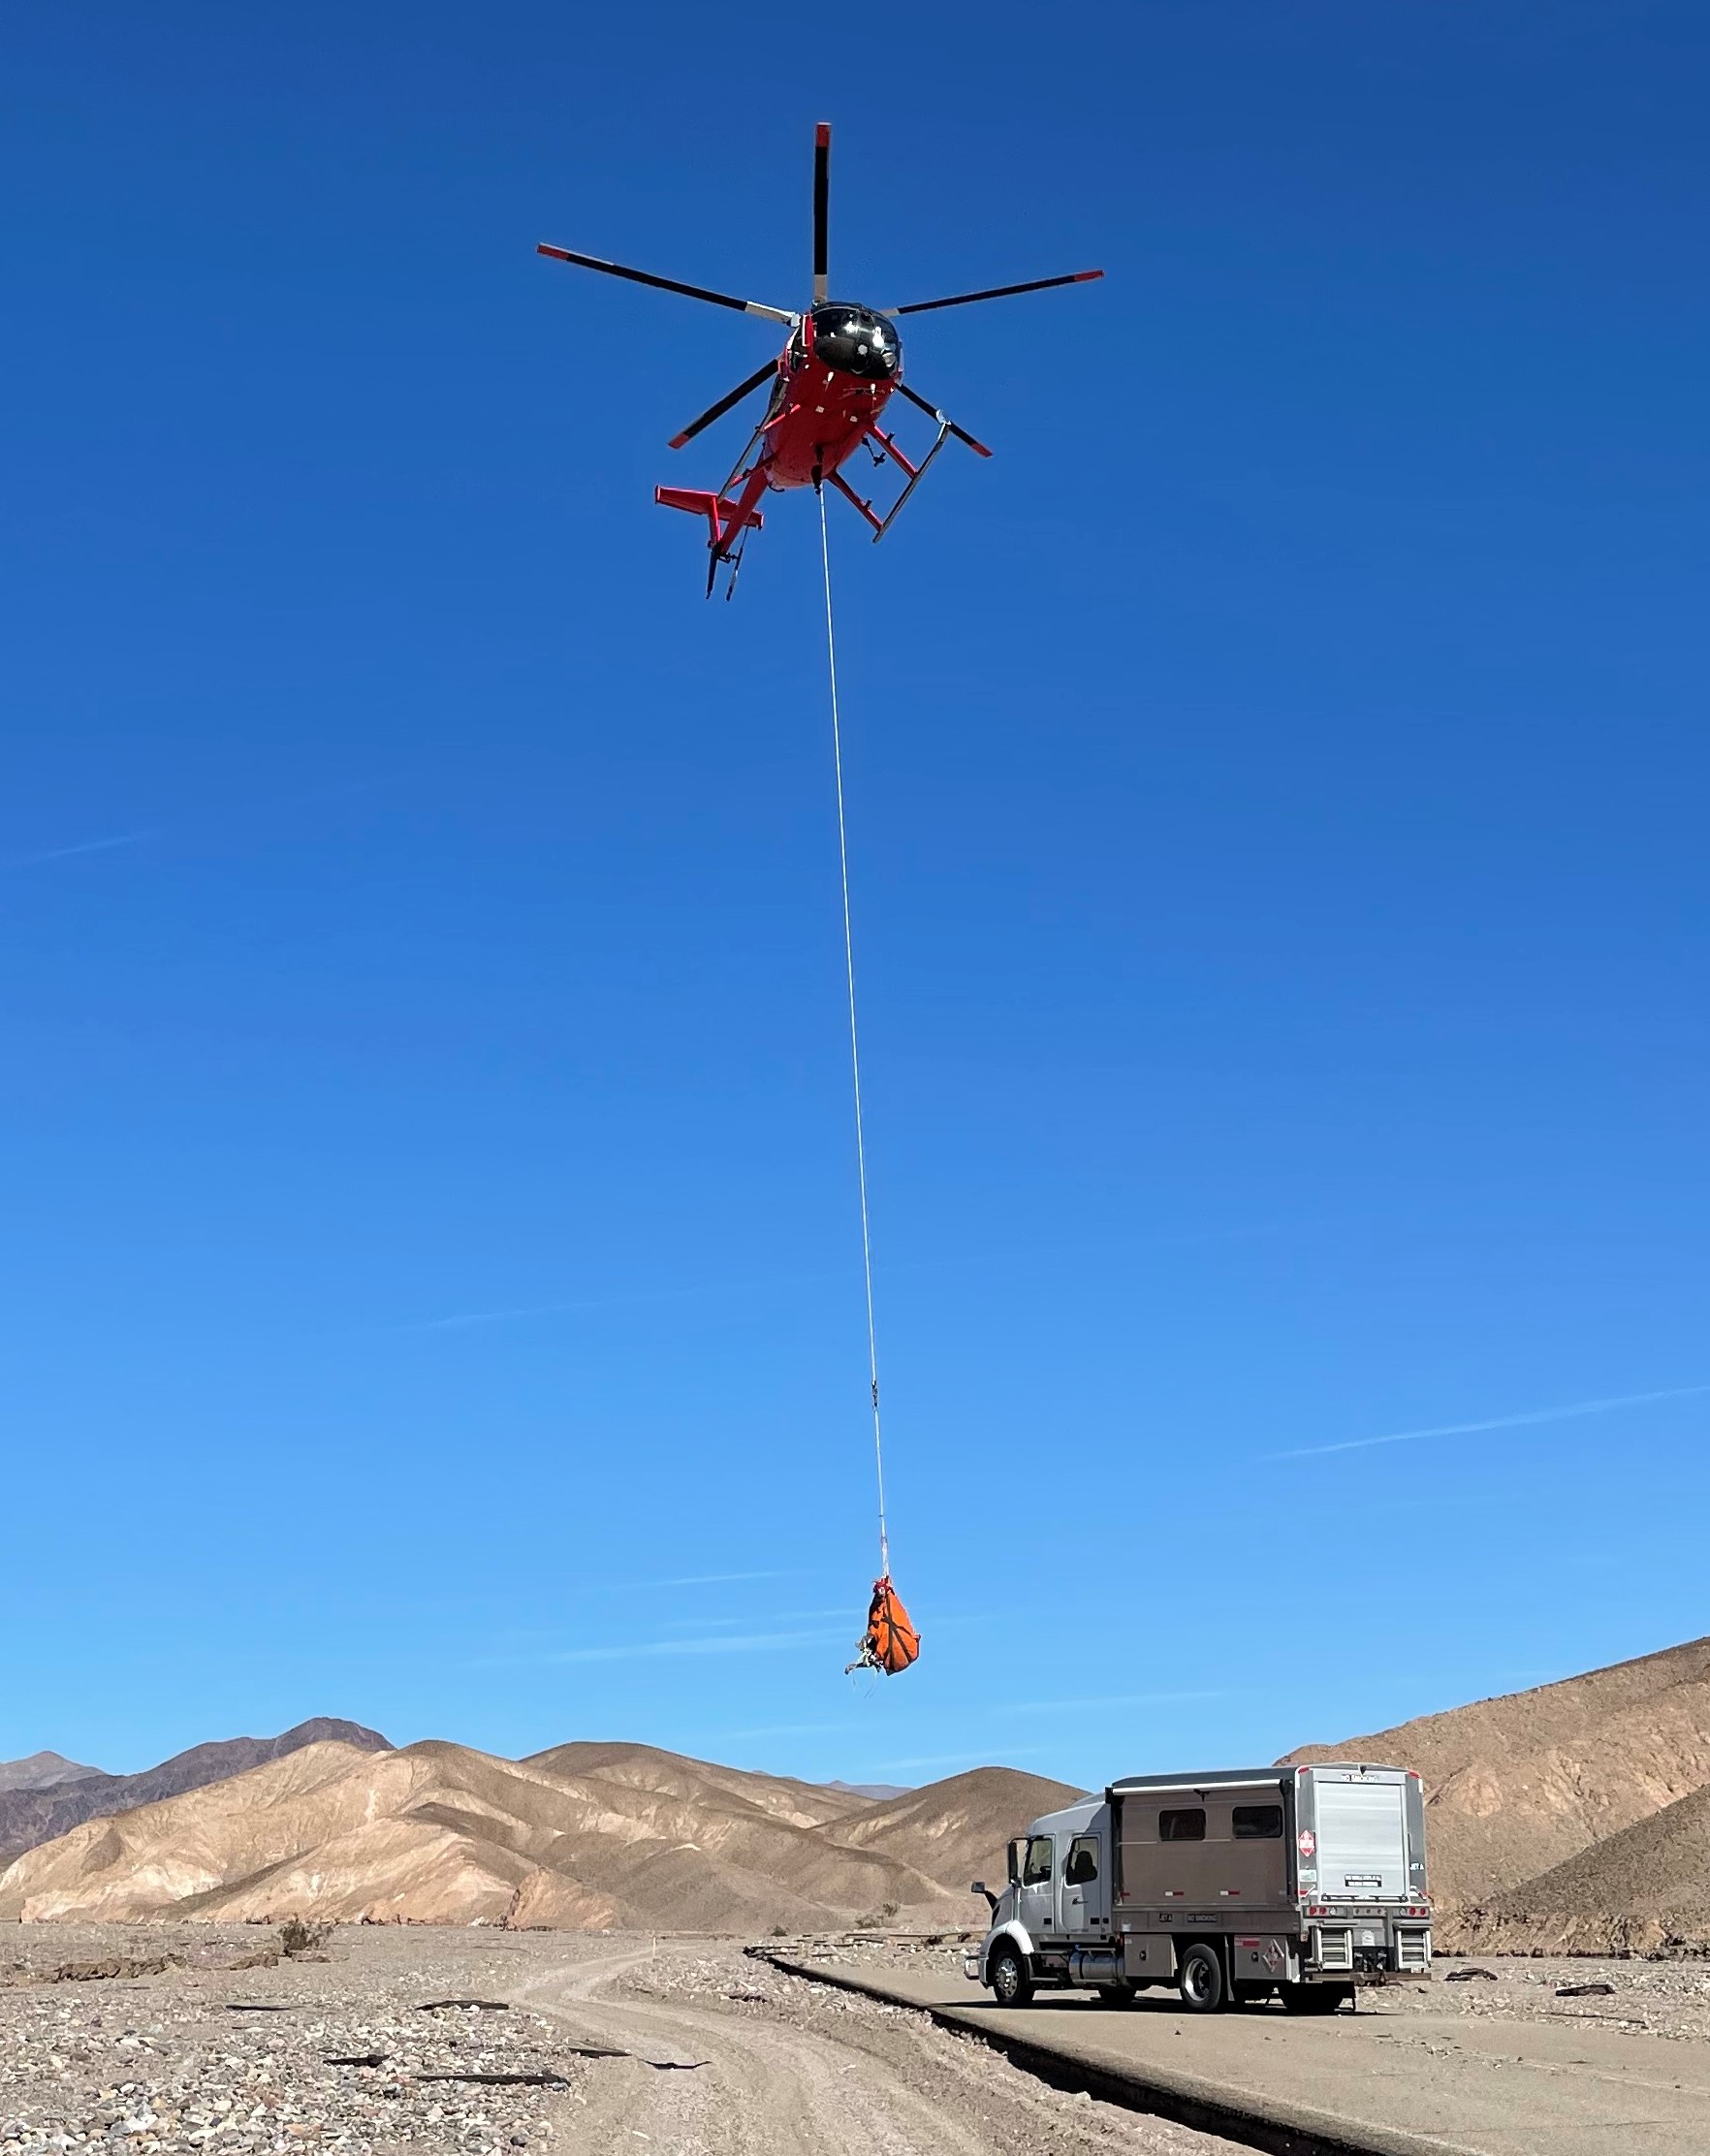 A red helicopter hovers in a blue sky with an orange object hanging by a cable from it.